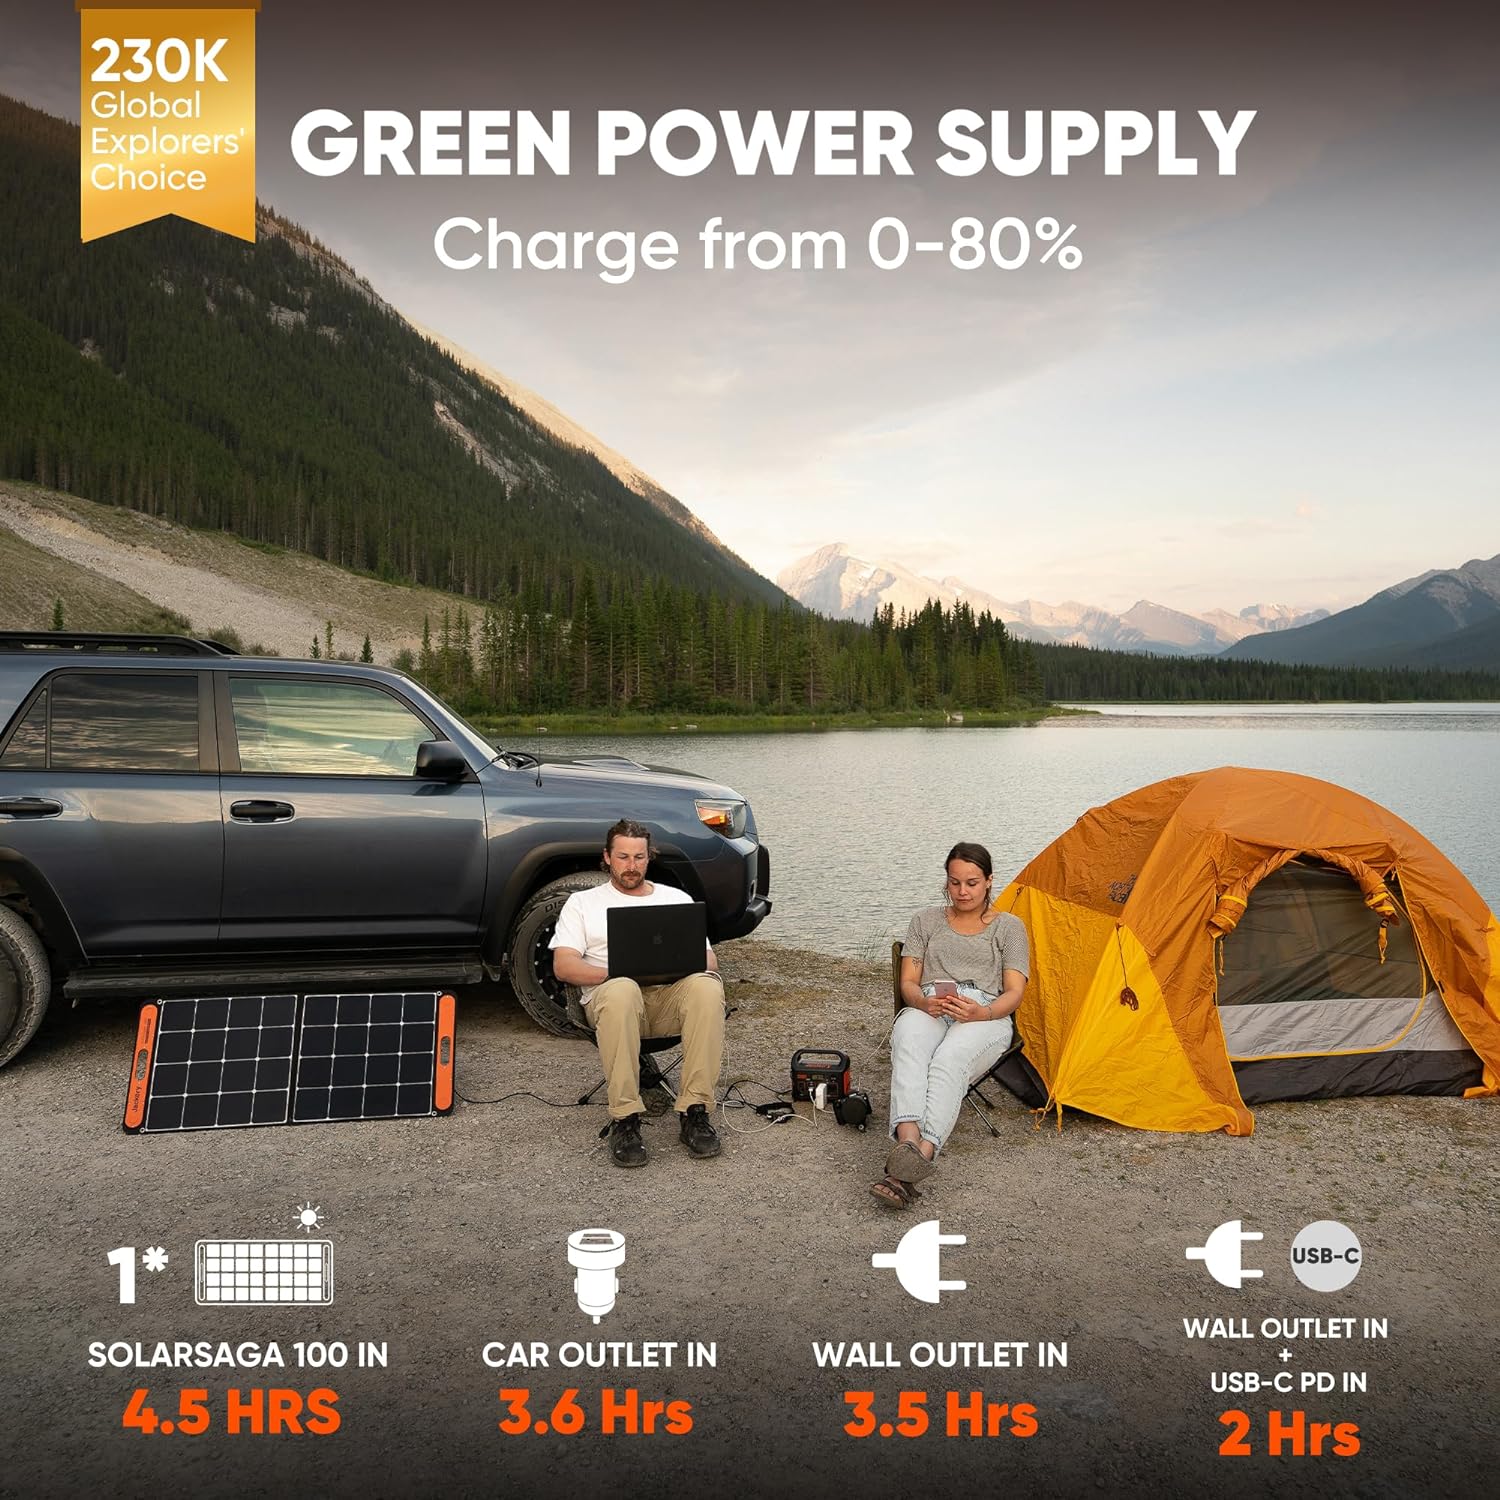 Jackery Portable Power Station Explorer 300, 293Wh Backup Lithium Battery, 110V/300W Pure Sine Wave AC Outlet, Solar Generator for Outdoors Camping Travel Hunting Blackout (Solar Panel Optional)